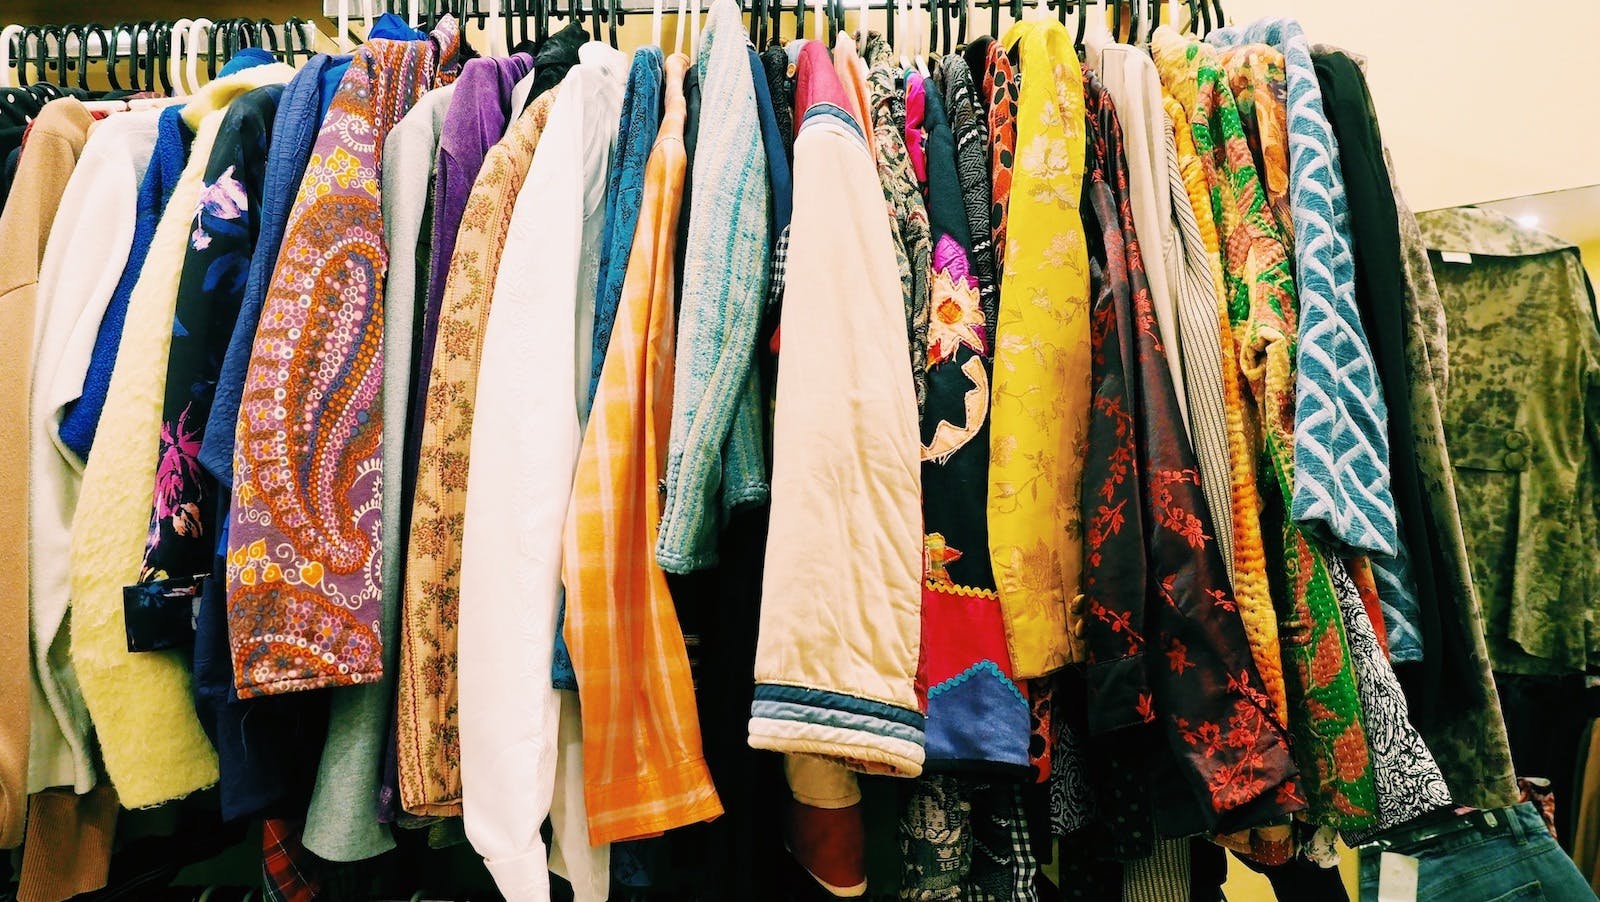 Sift your way through Perth's best op shops - Perth is OK!